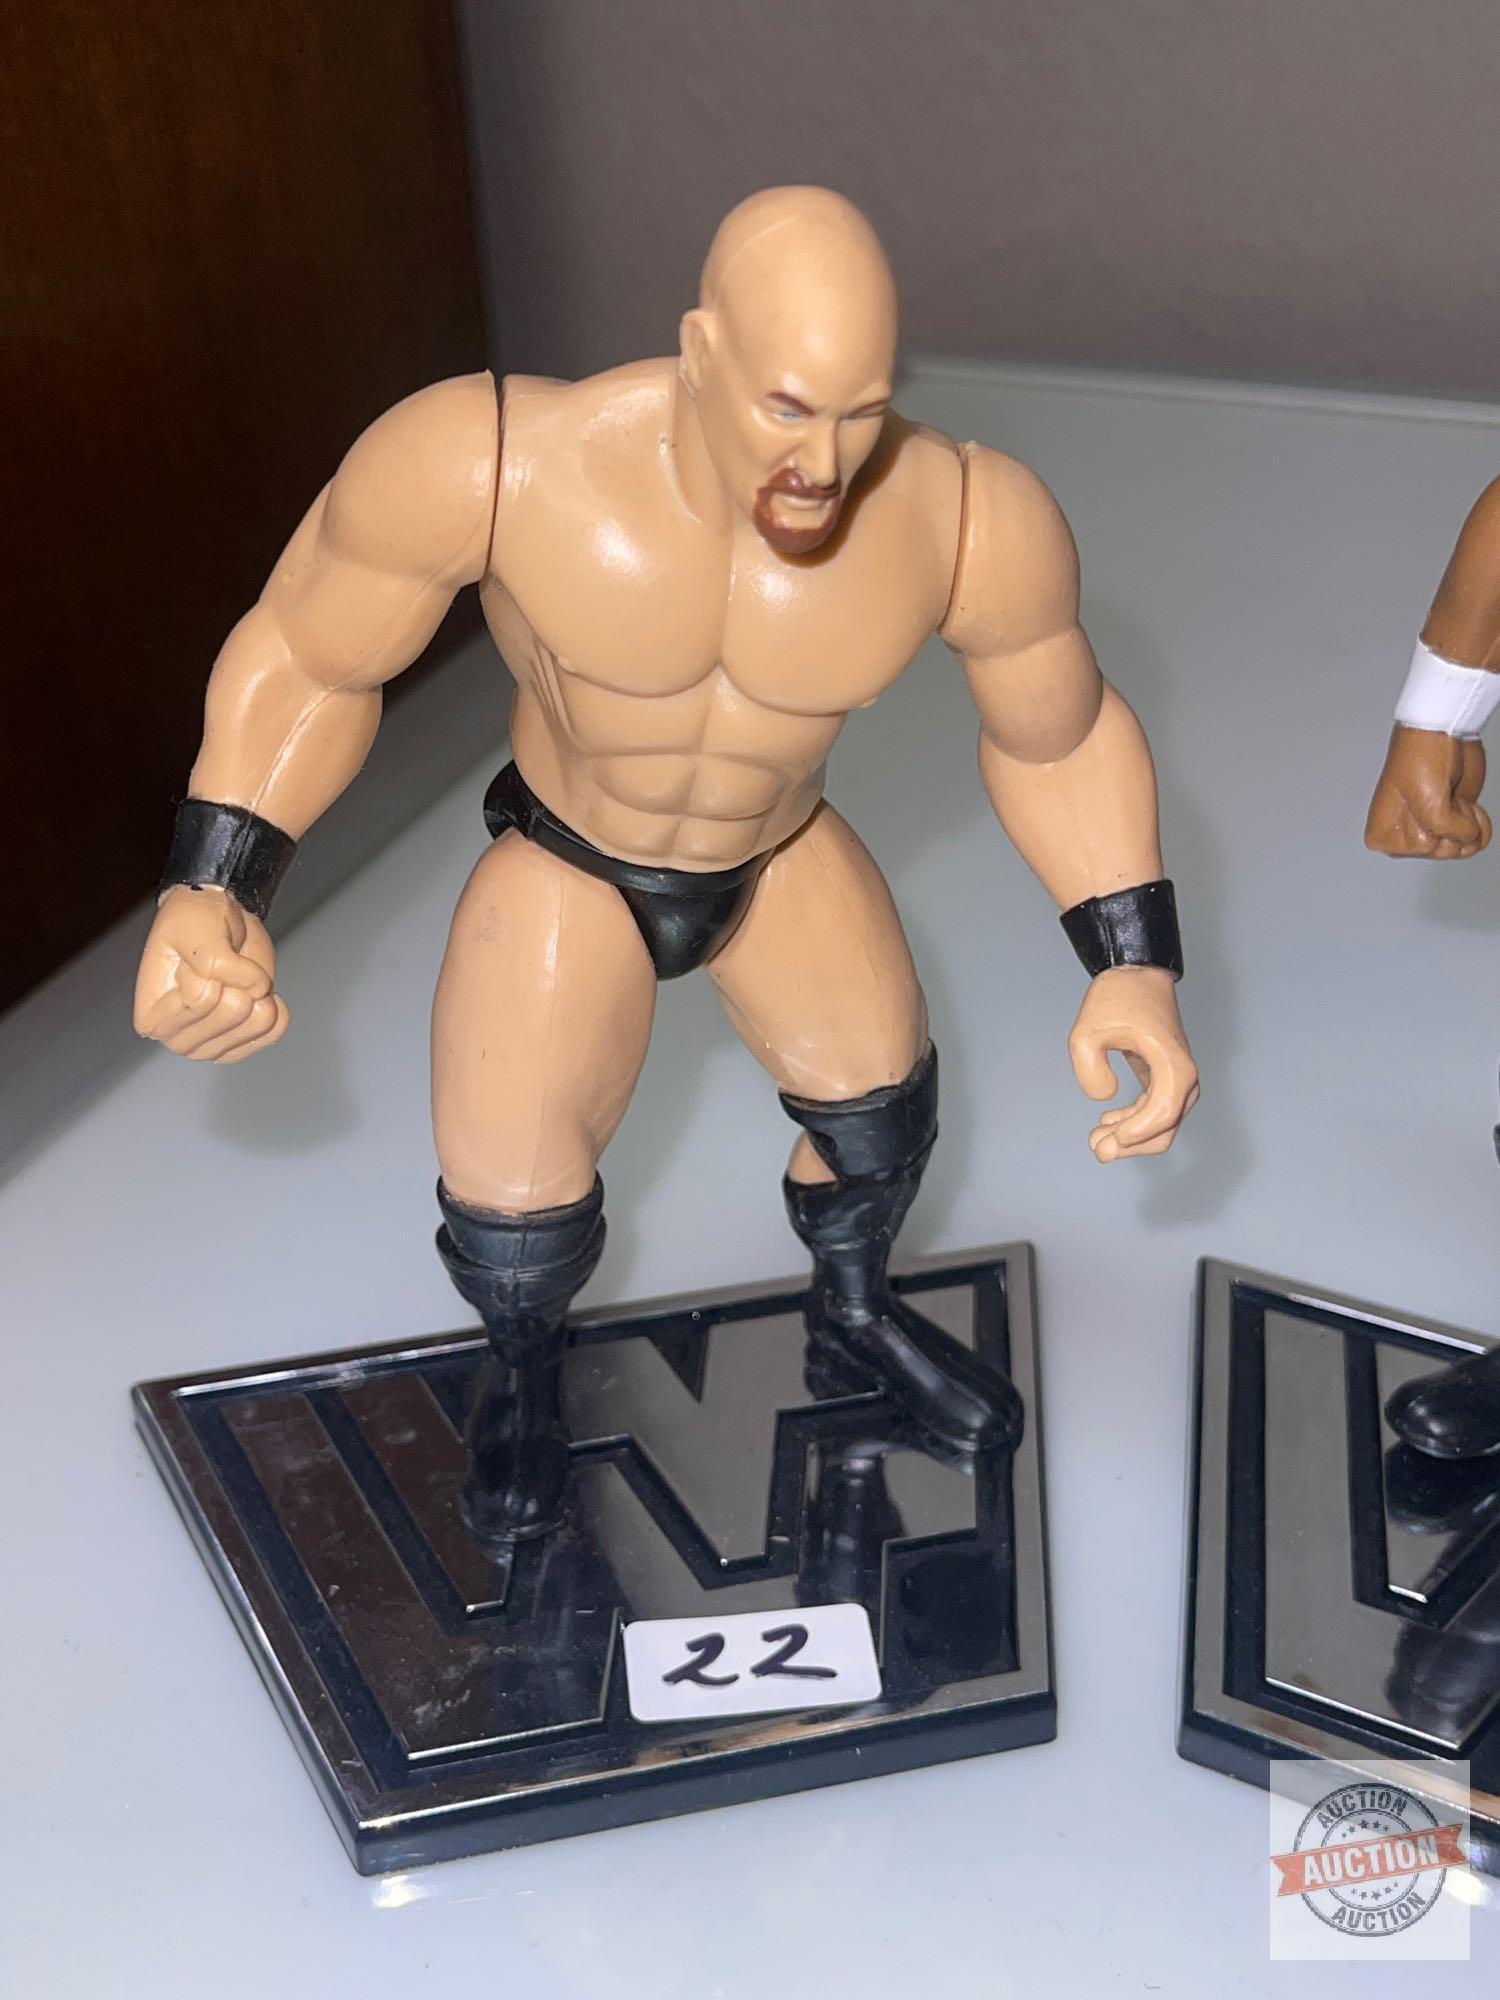 Toys - WWF 5 Wrestling Auction Figures, 1996, 6", 4 stands, 5x's the money